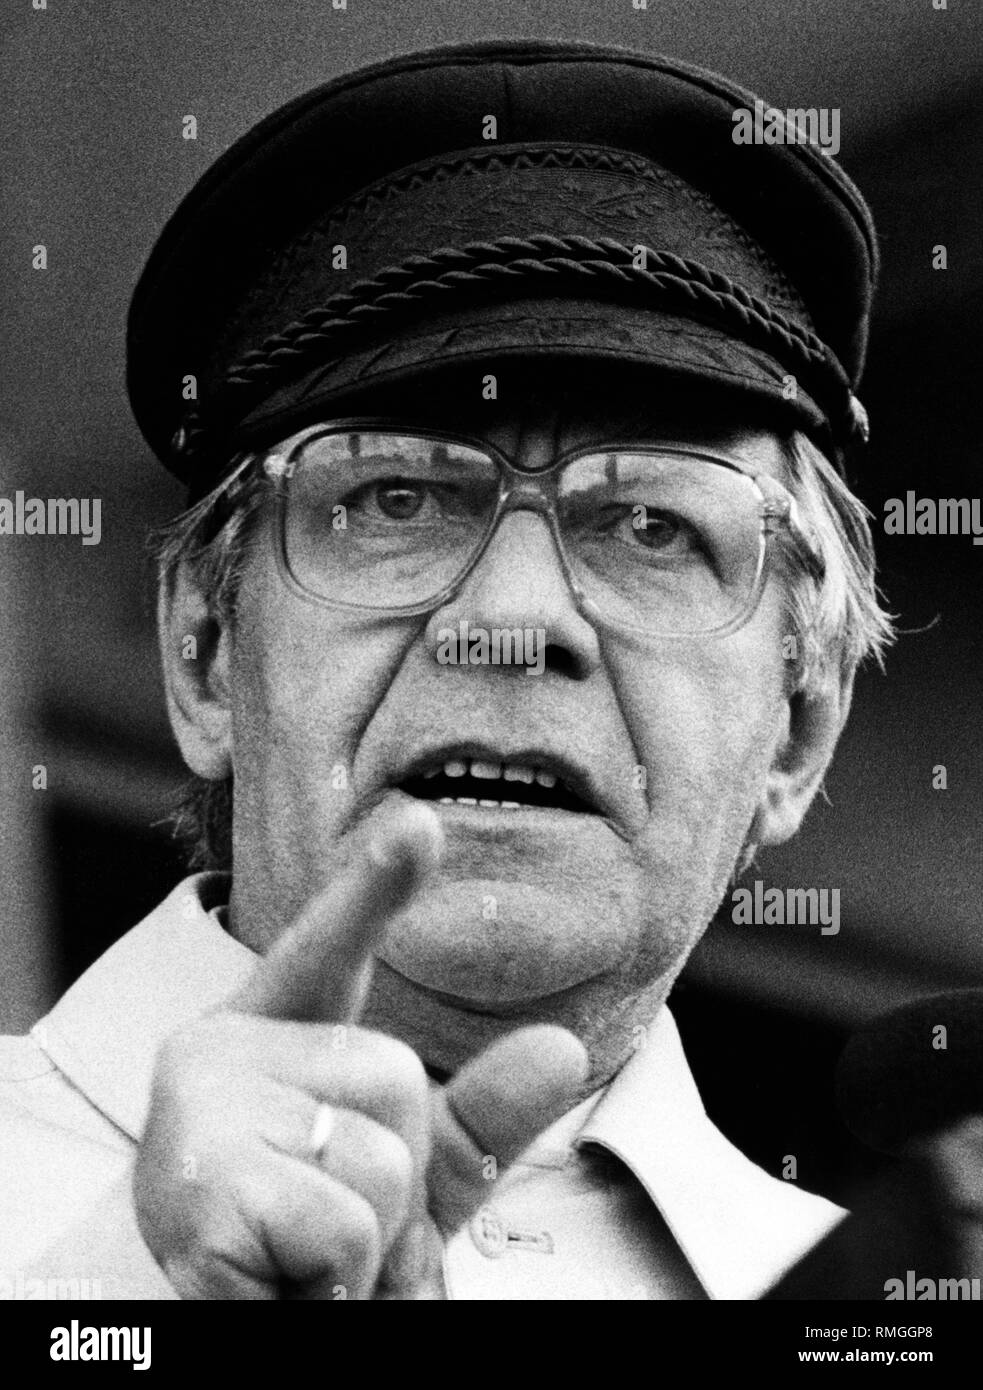 Chancellor Helmut Schmidt with Prinz Heinrich hat and glasses, gesticulating. Stock Photo